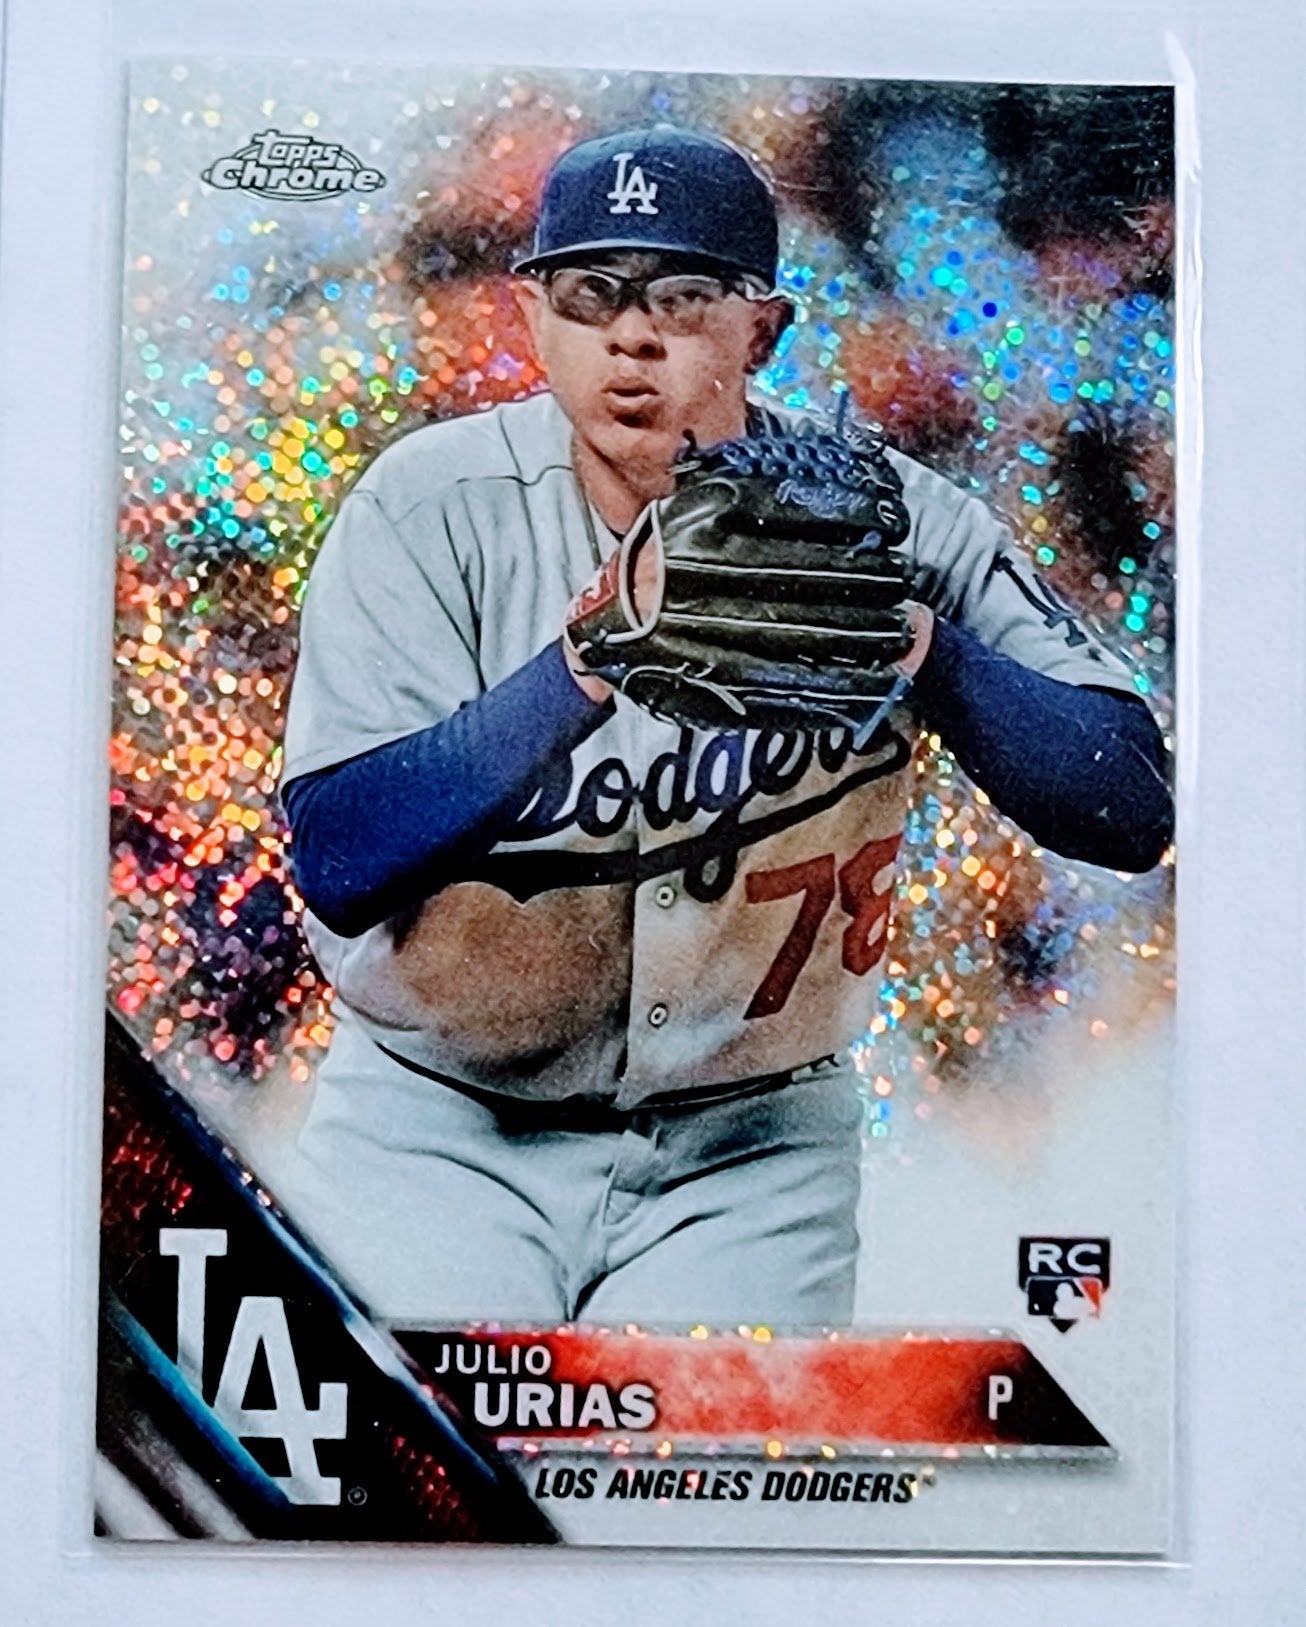 2016 Topps Chrome Julio Urias Rookie Sparkle Refractor Baseball Card TPTV simple Xclusive Collectibles   